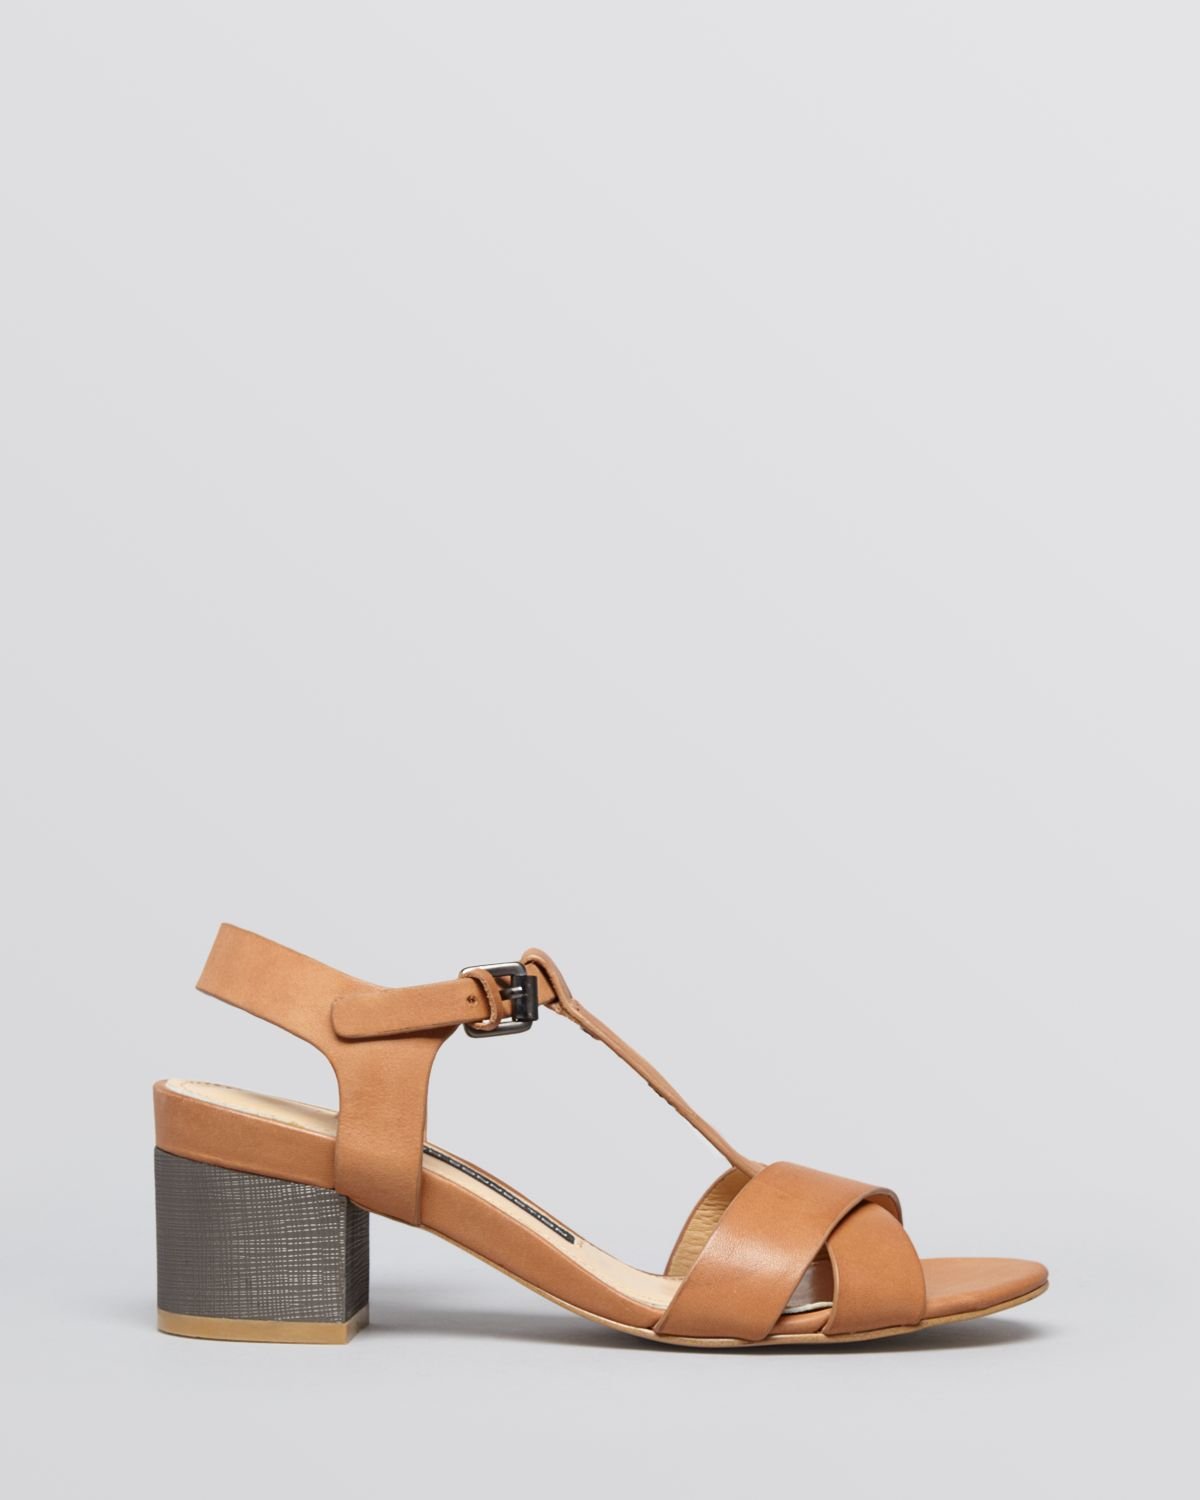 Lyst French Connection  Open Toe City Sandals  Lara Block 